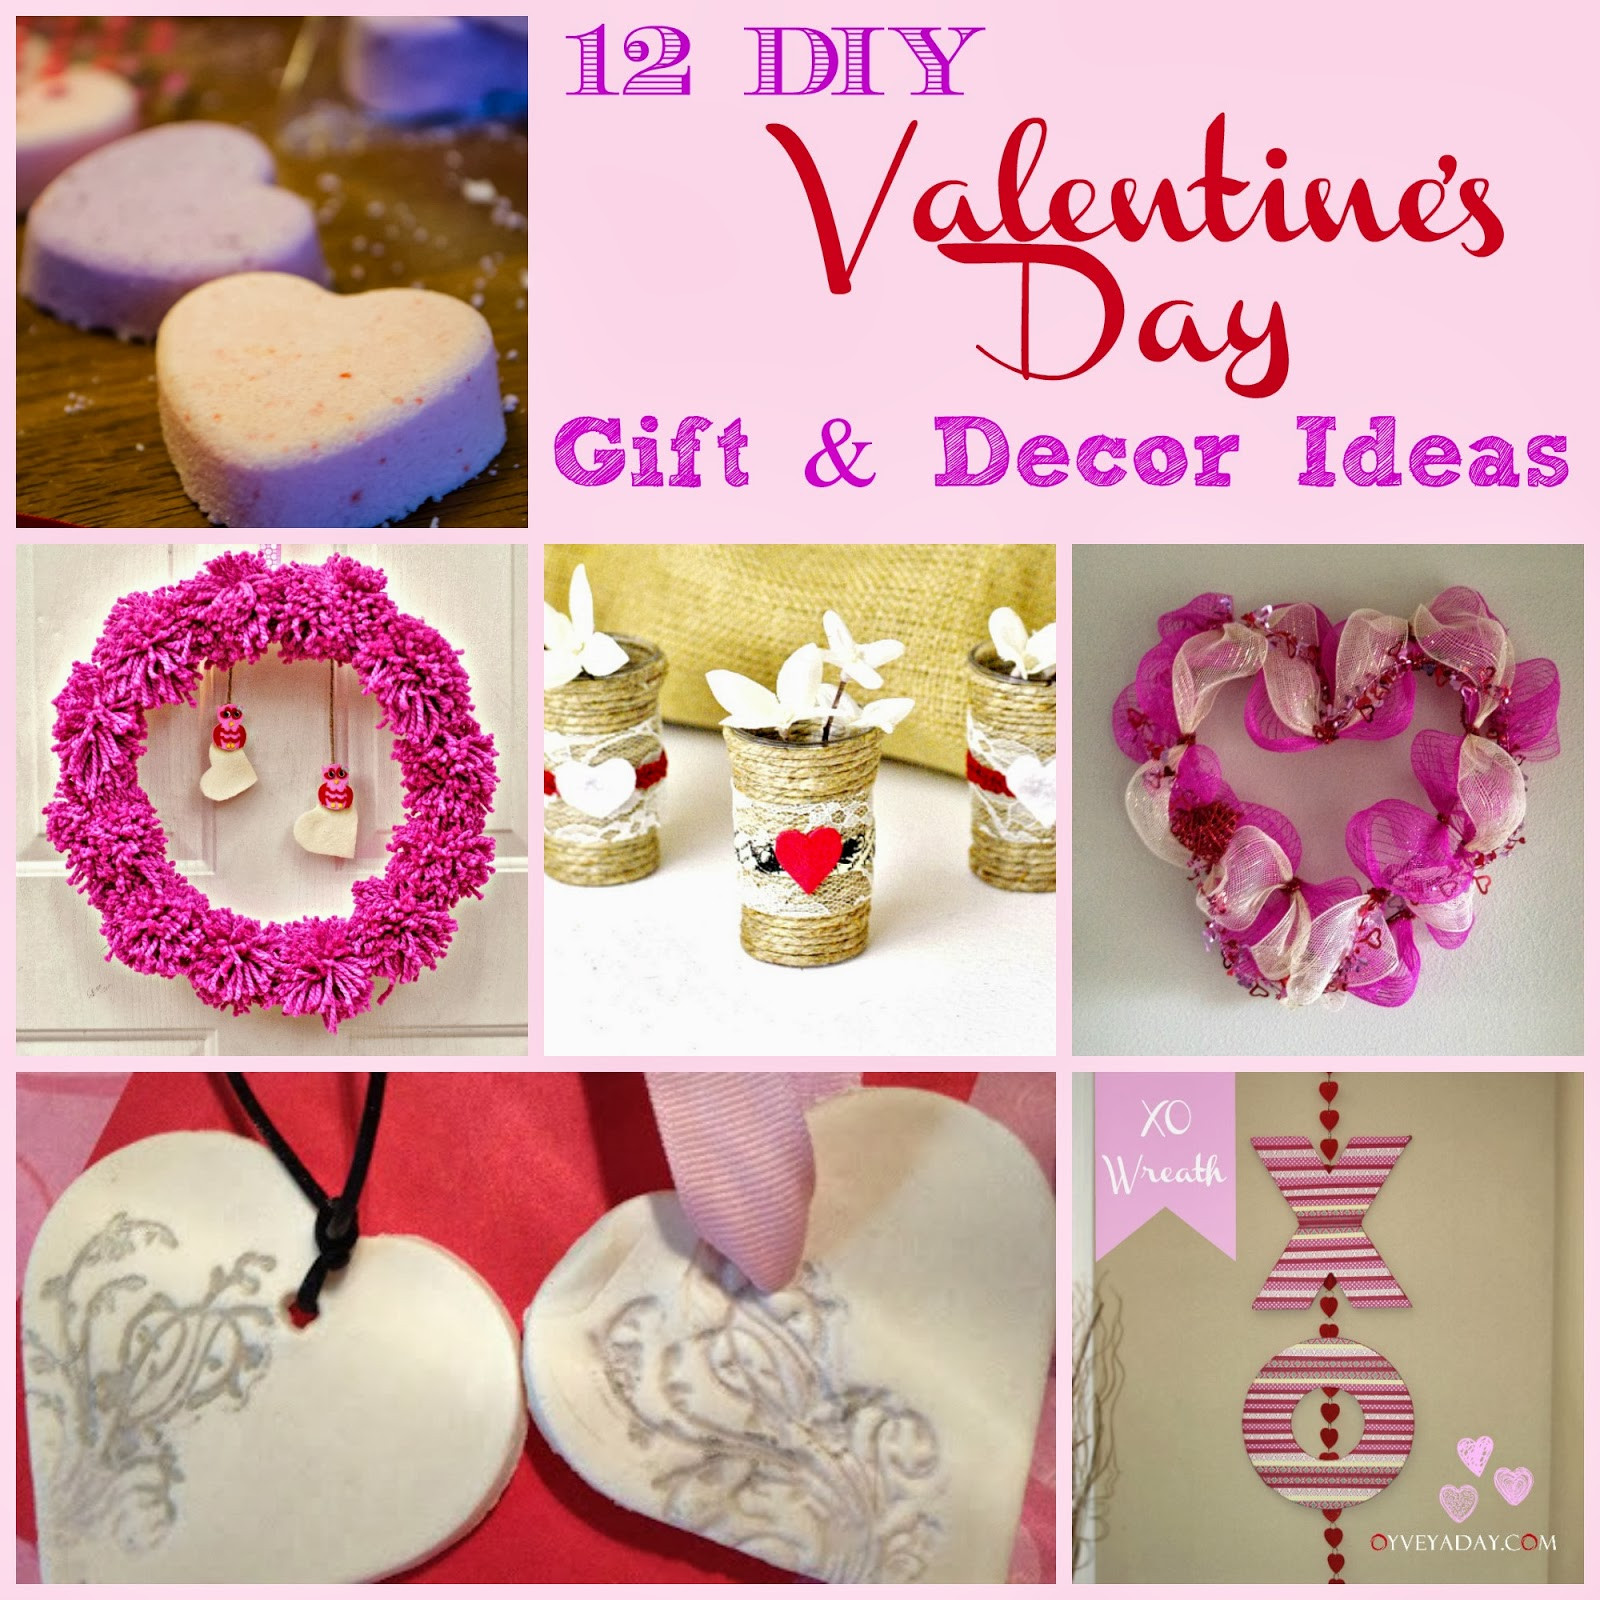 Valentines Day Homemade Gift
 12 DIY Valentine s Day Gift & Decor Ideas Outnumbered 3 to 1